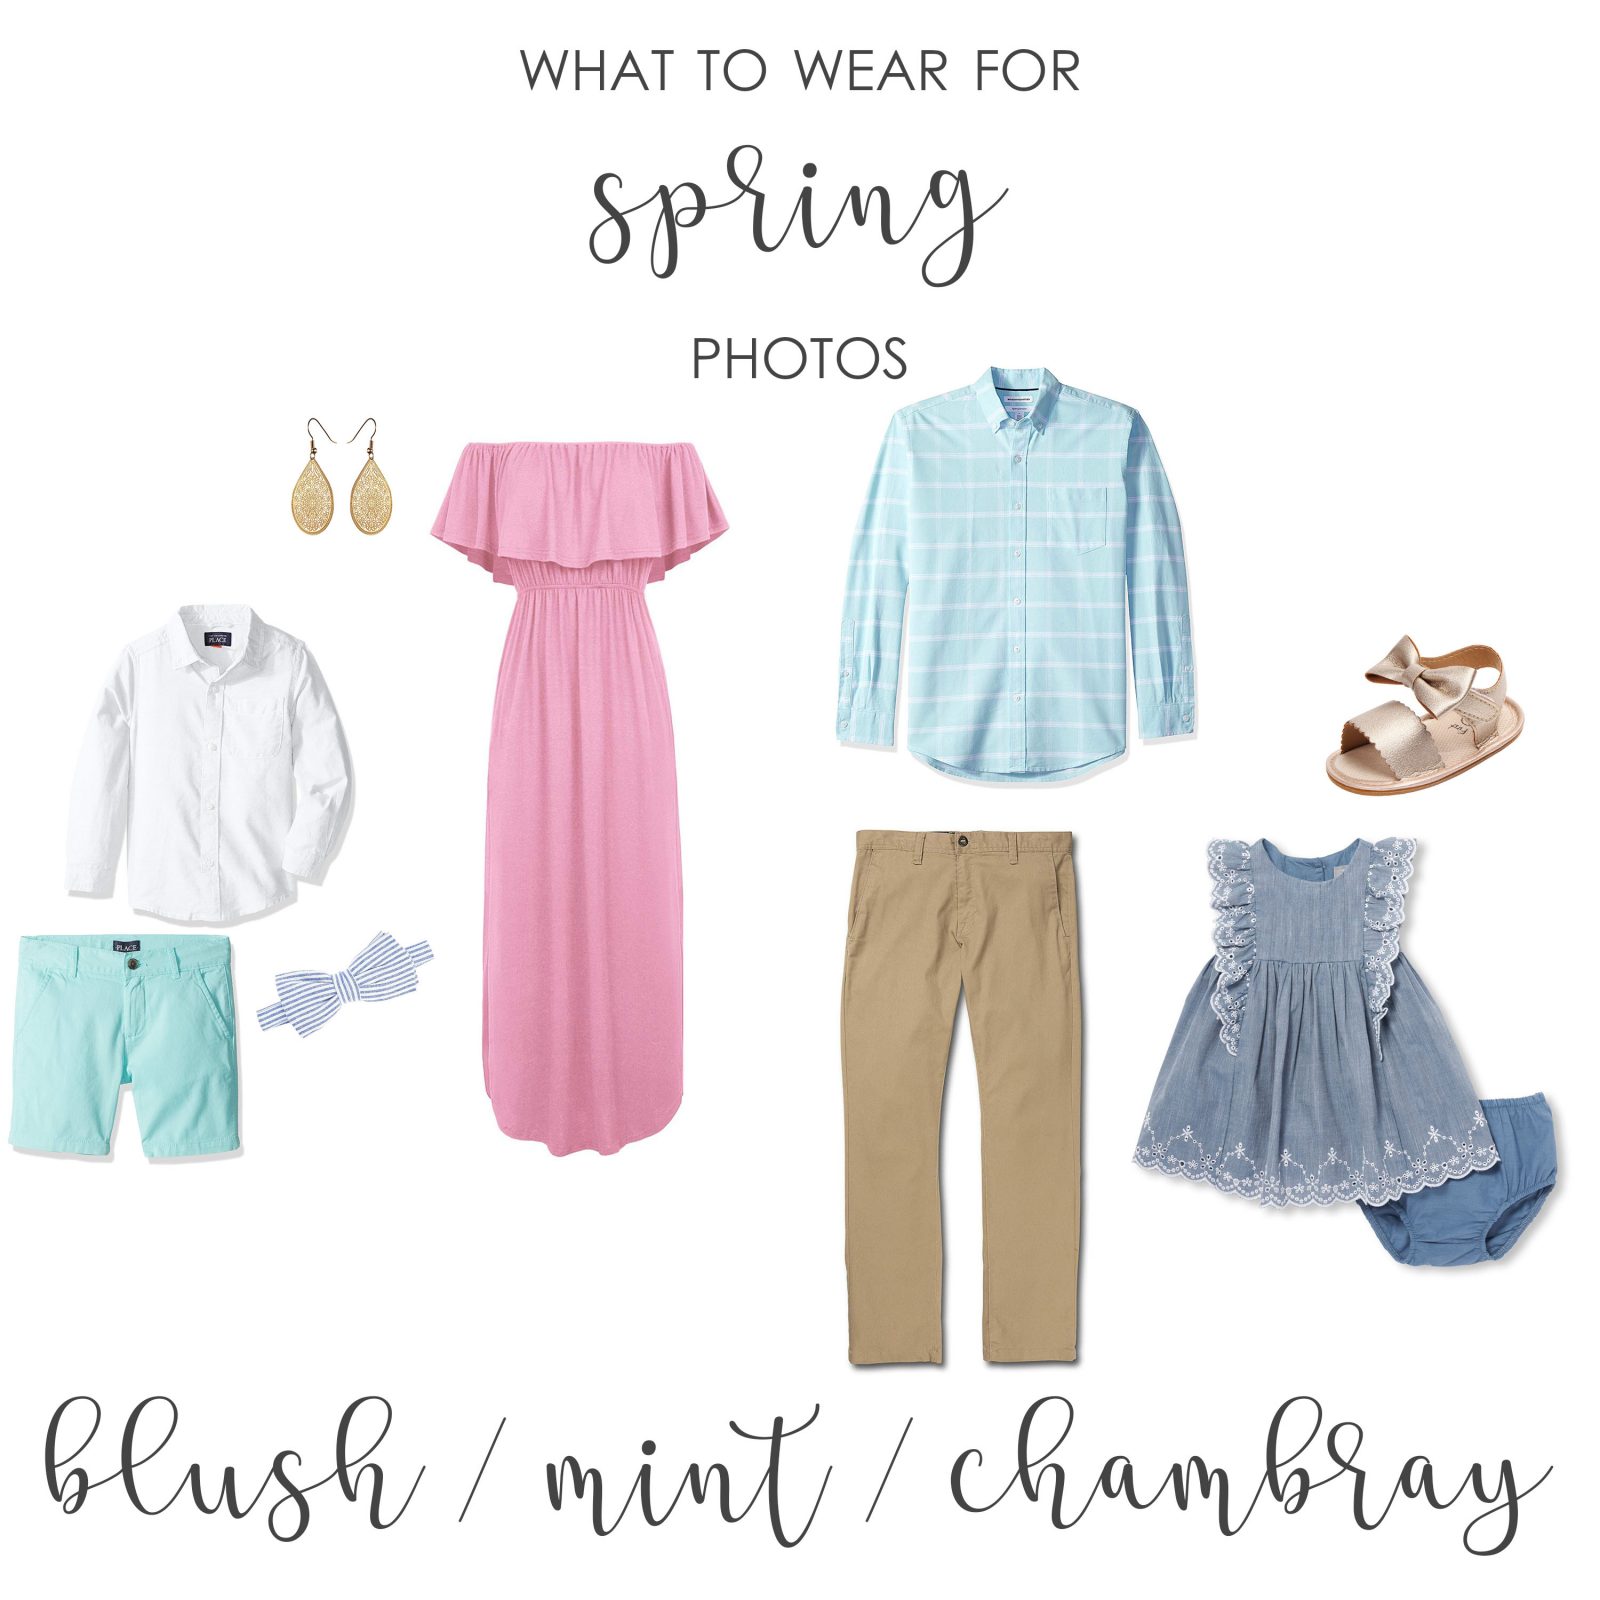 what to wear for pictures - blush mint chambray